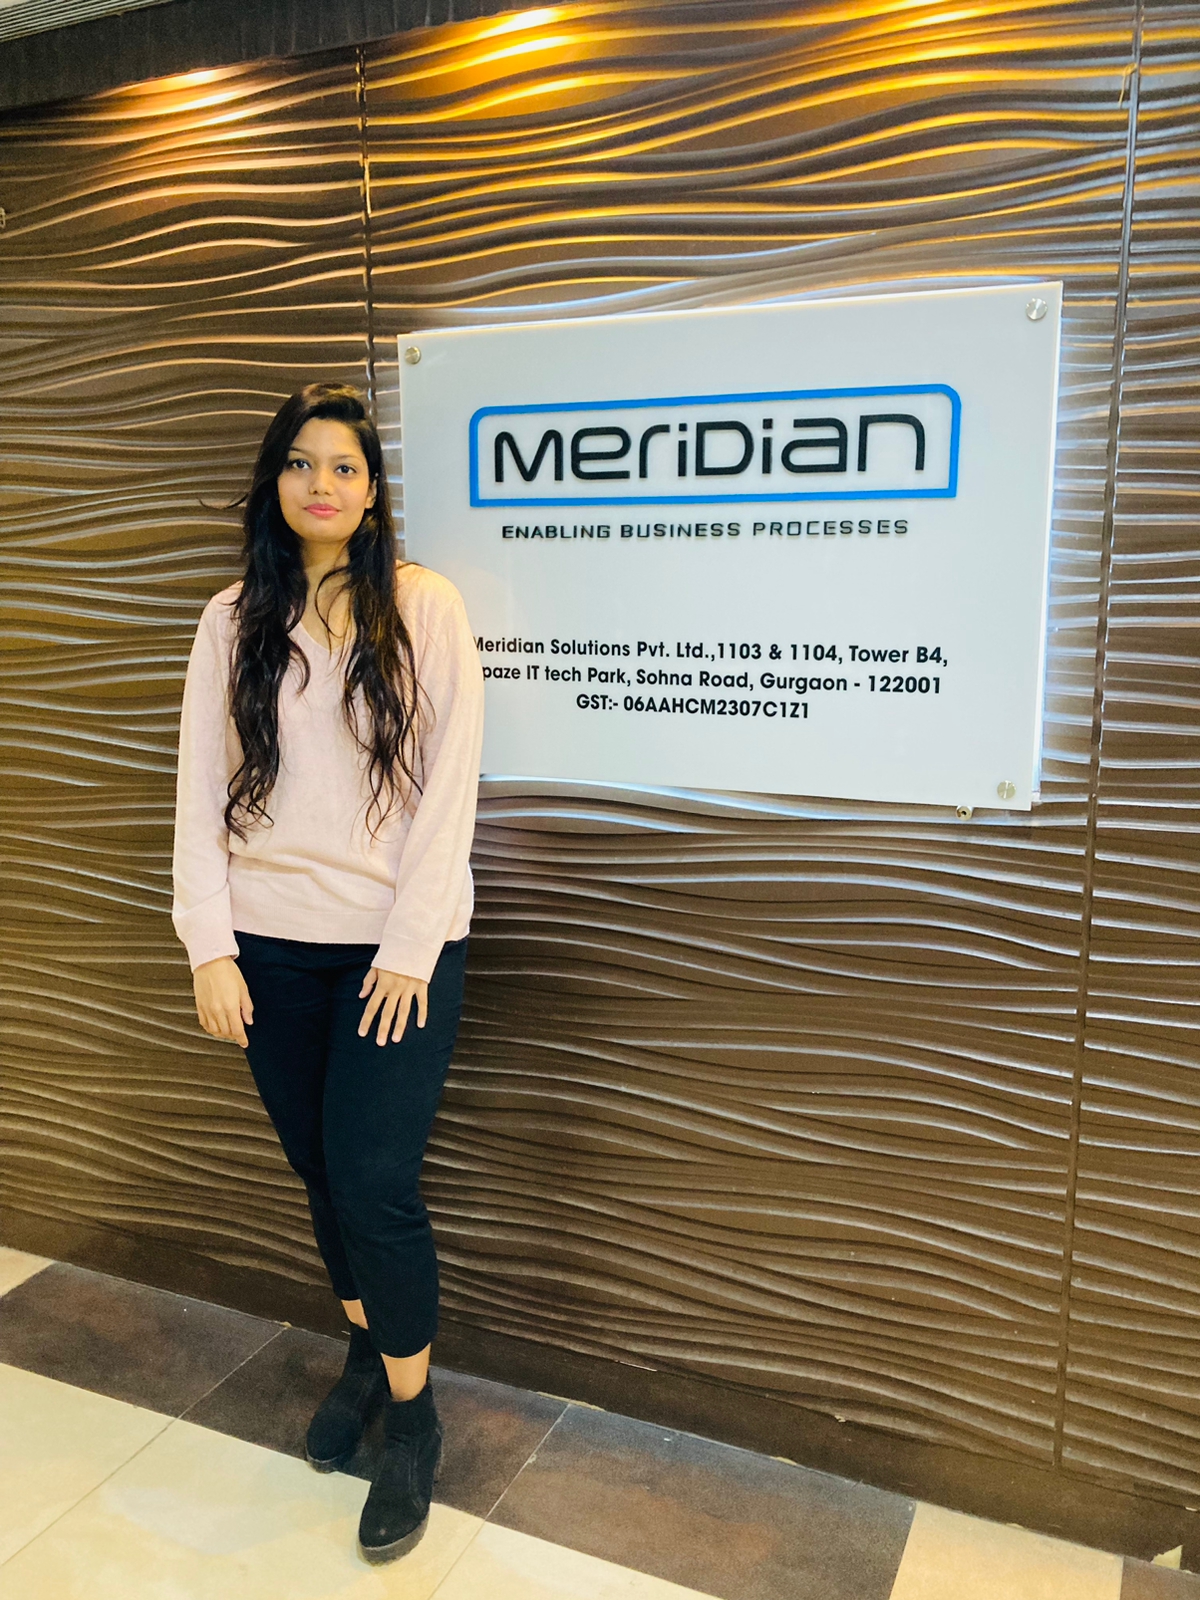 Student placed at meridian